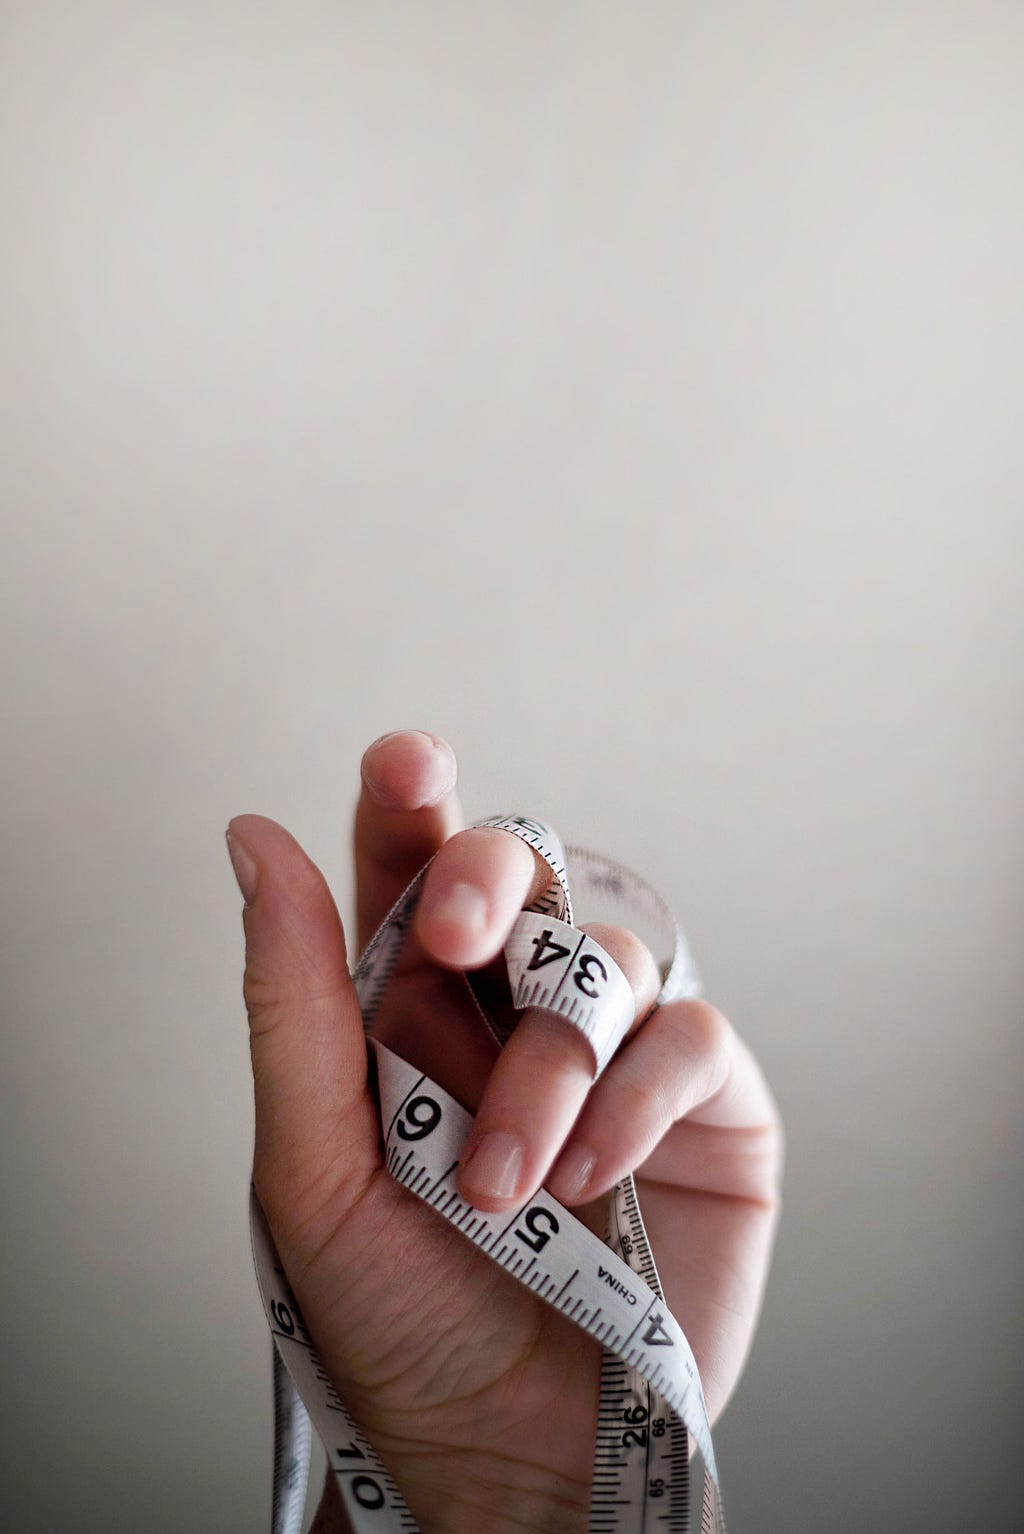 A person’s hand with a cloth measuring tape tangled up within it. The palm of the hand is facing the camera.